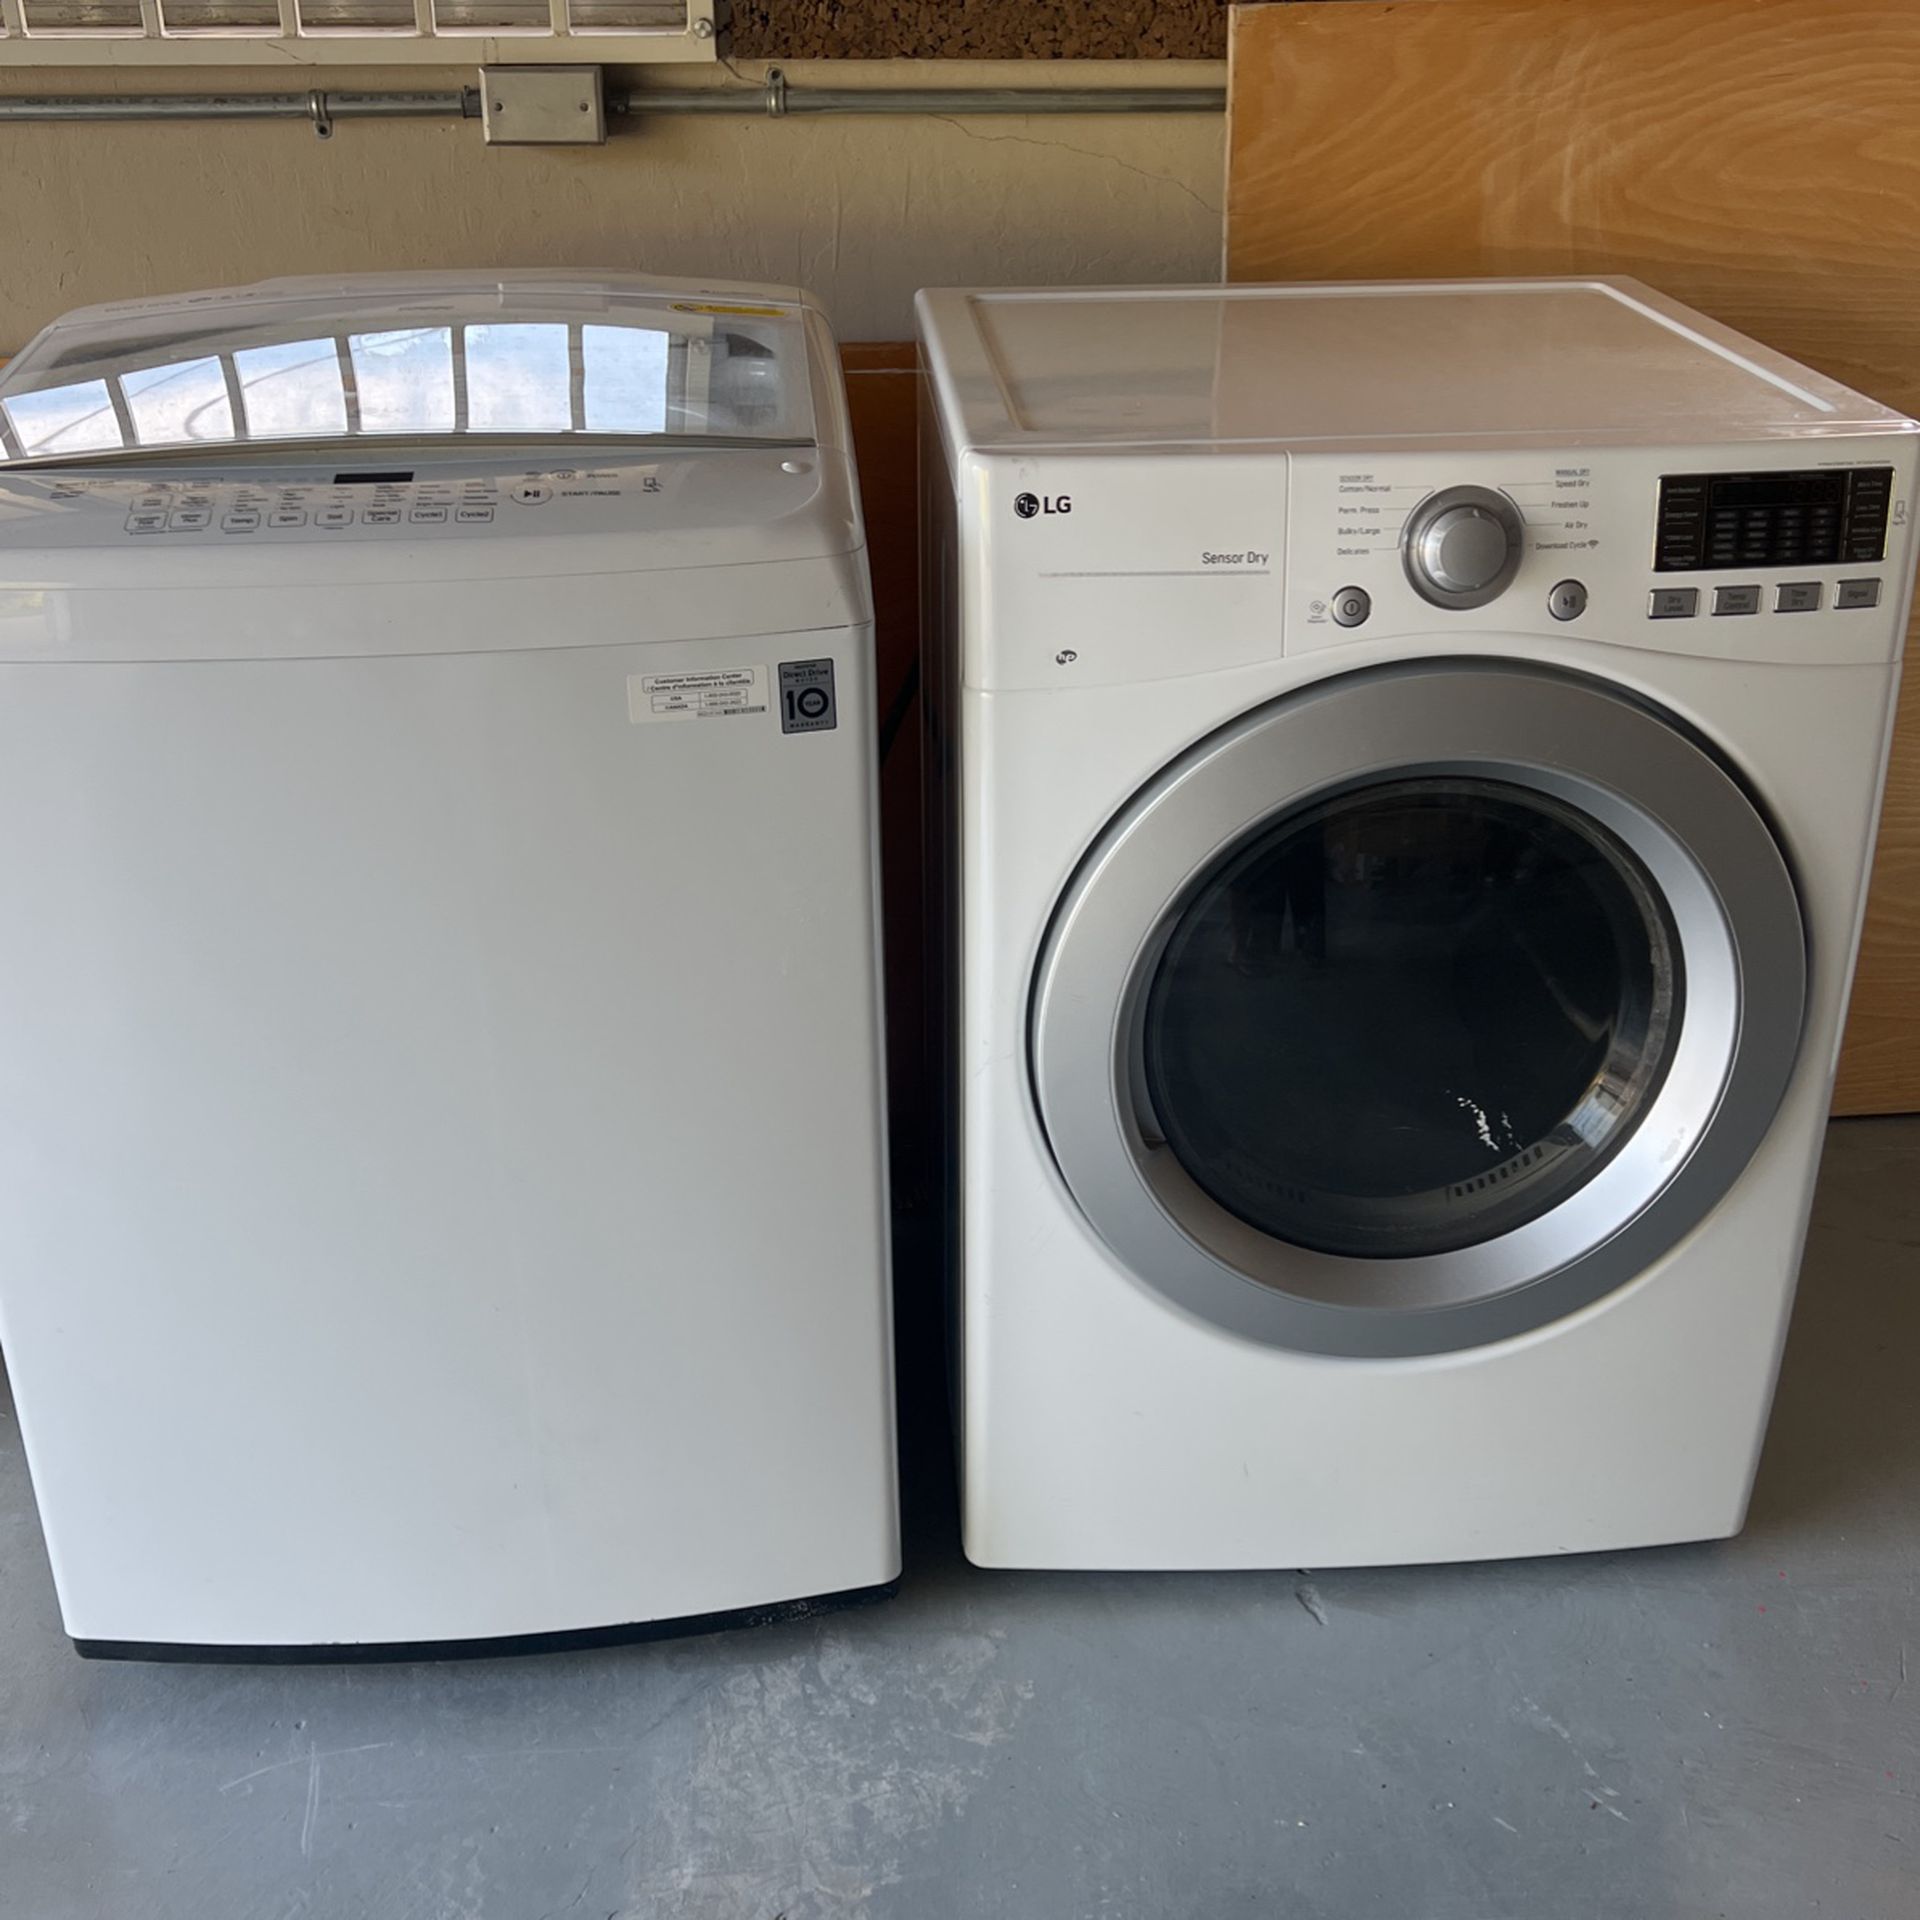 LG Washer Dryer barely used: Electric 